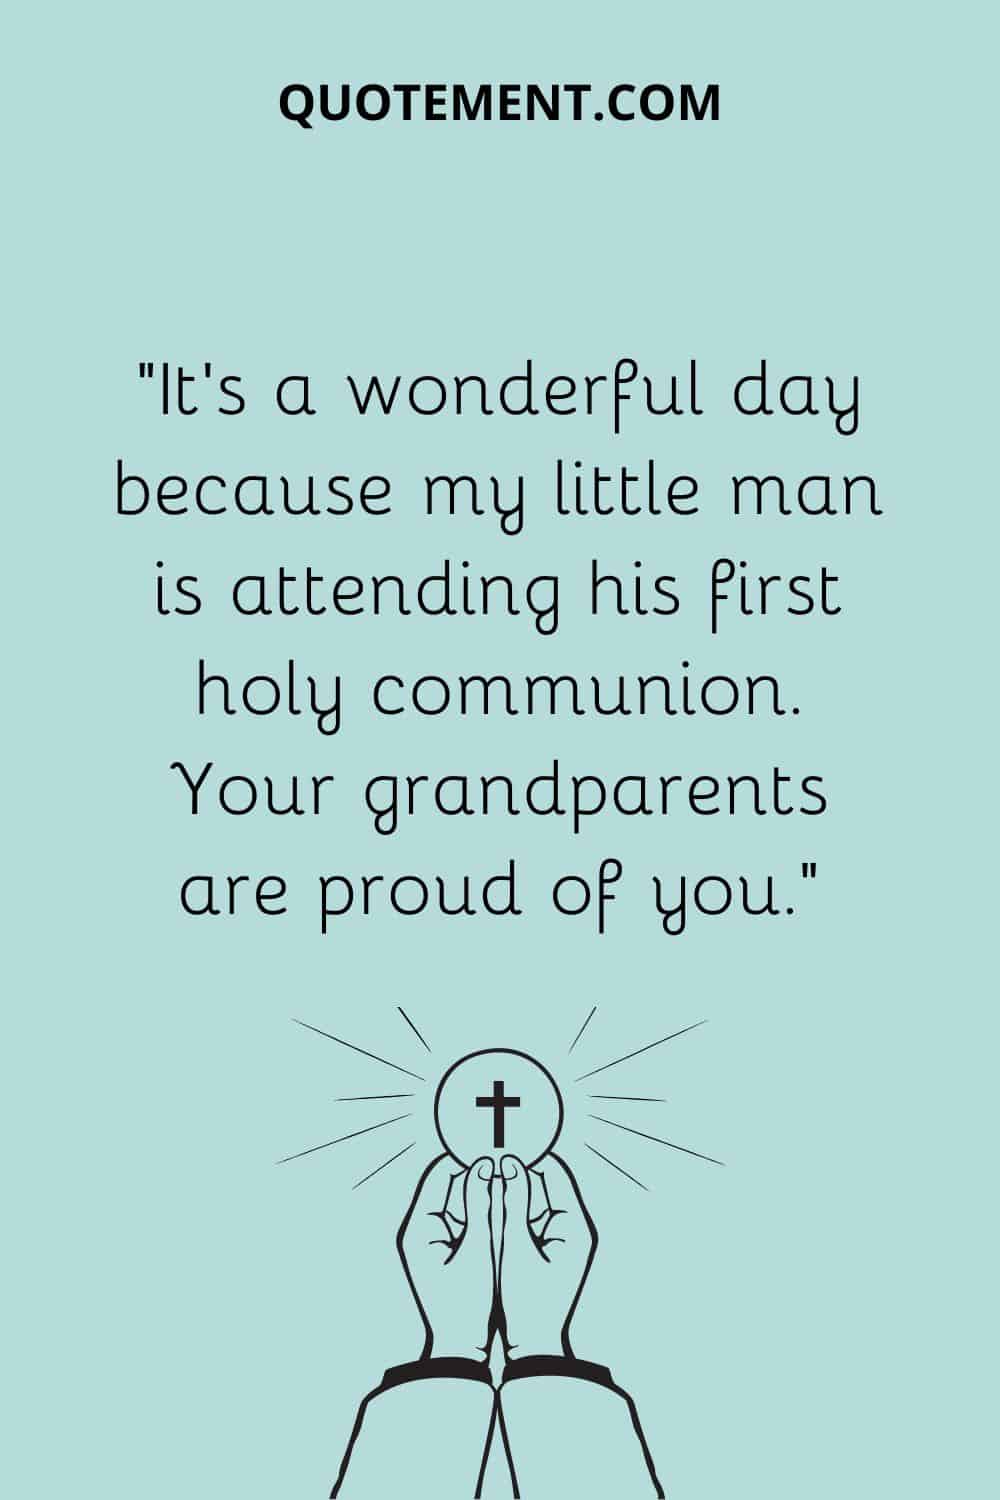 “It’s a wonderful day because my little man is attending his first holy communion. Your grandparents are proud of you.”